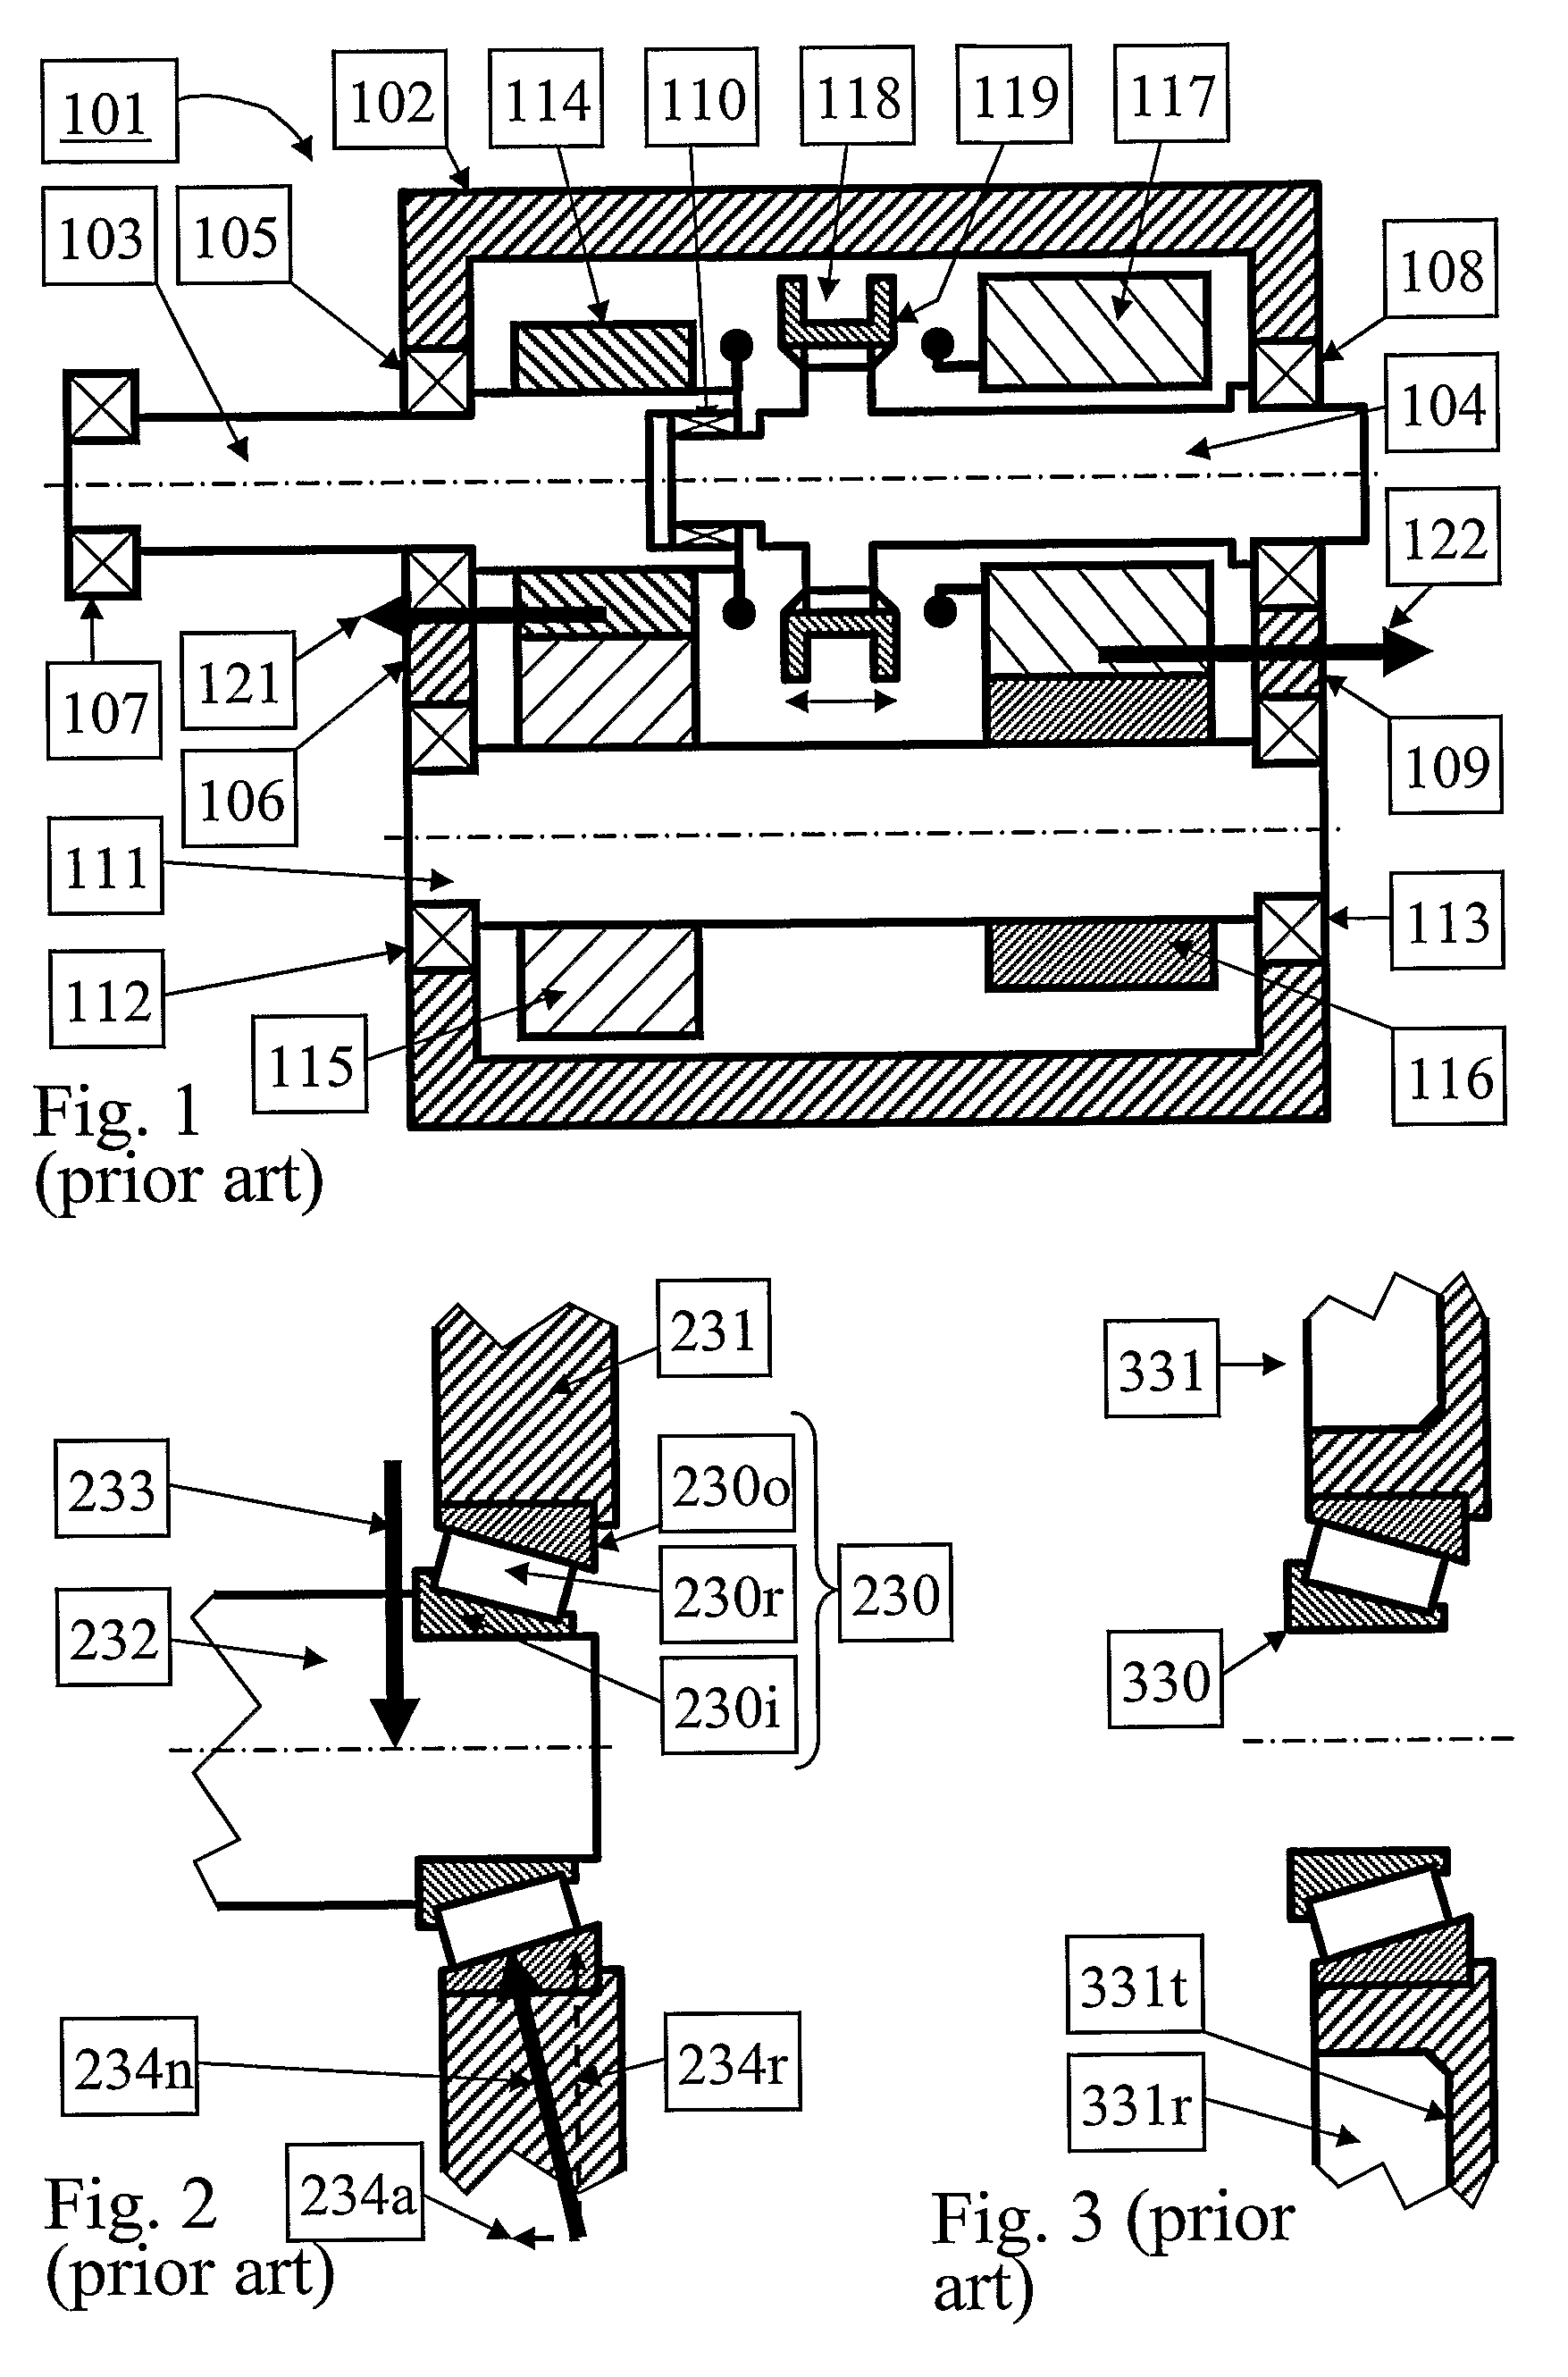 Gear transmission with reduced transmission wall housing deflection